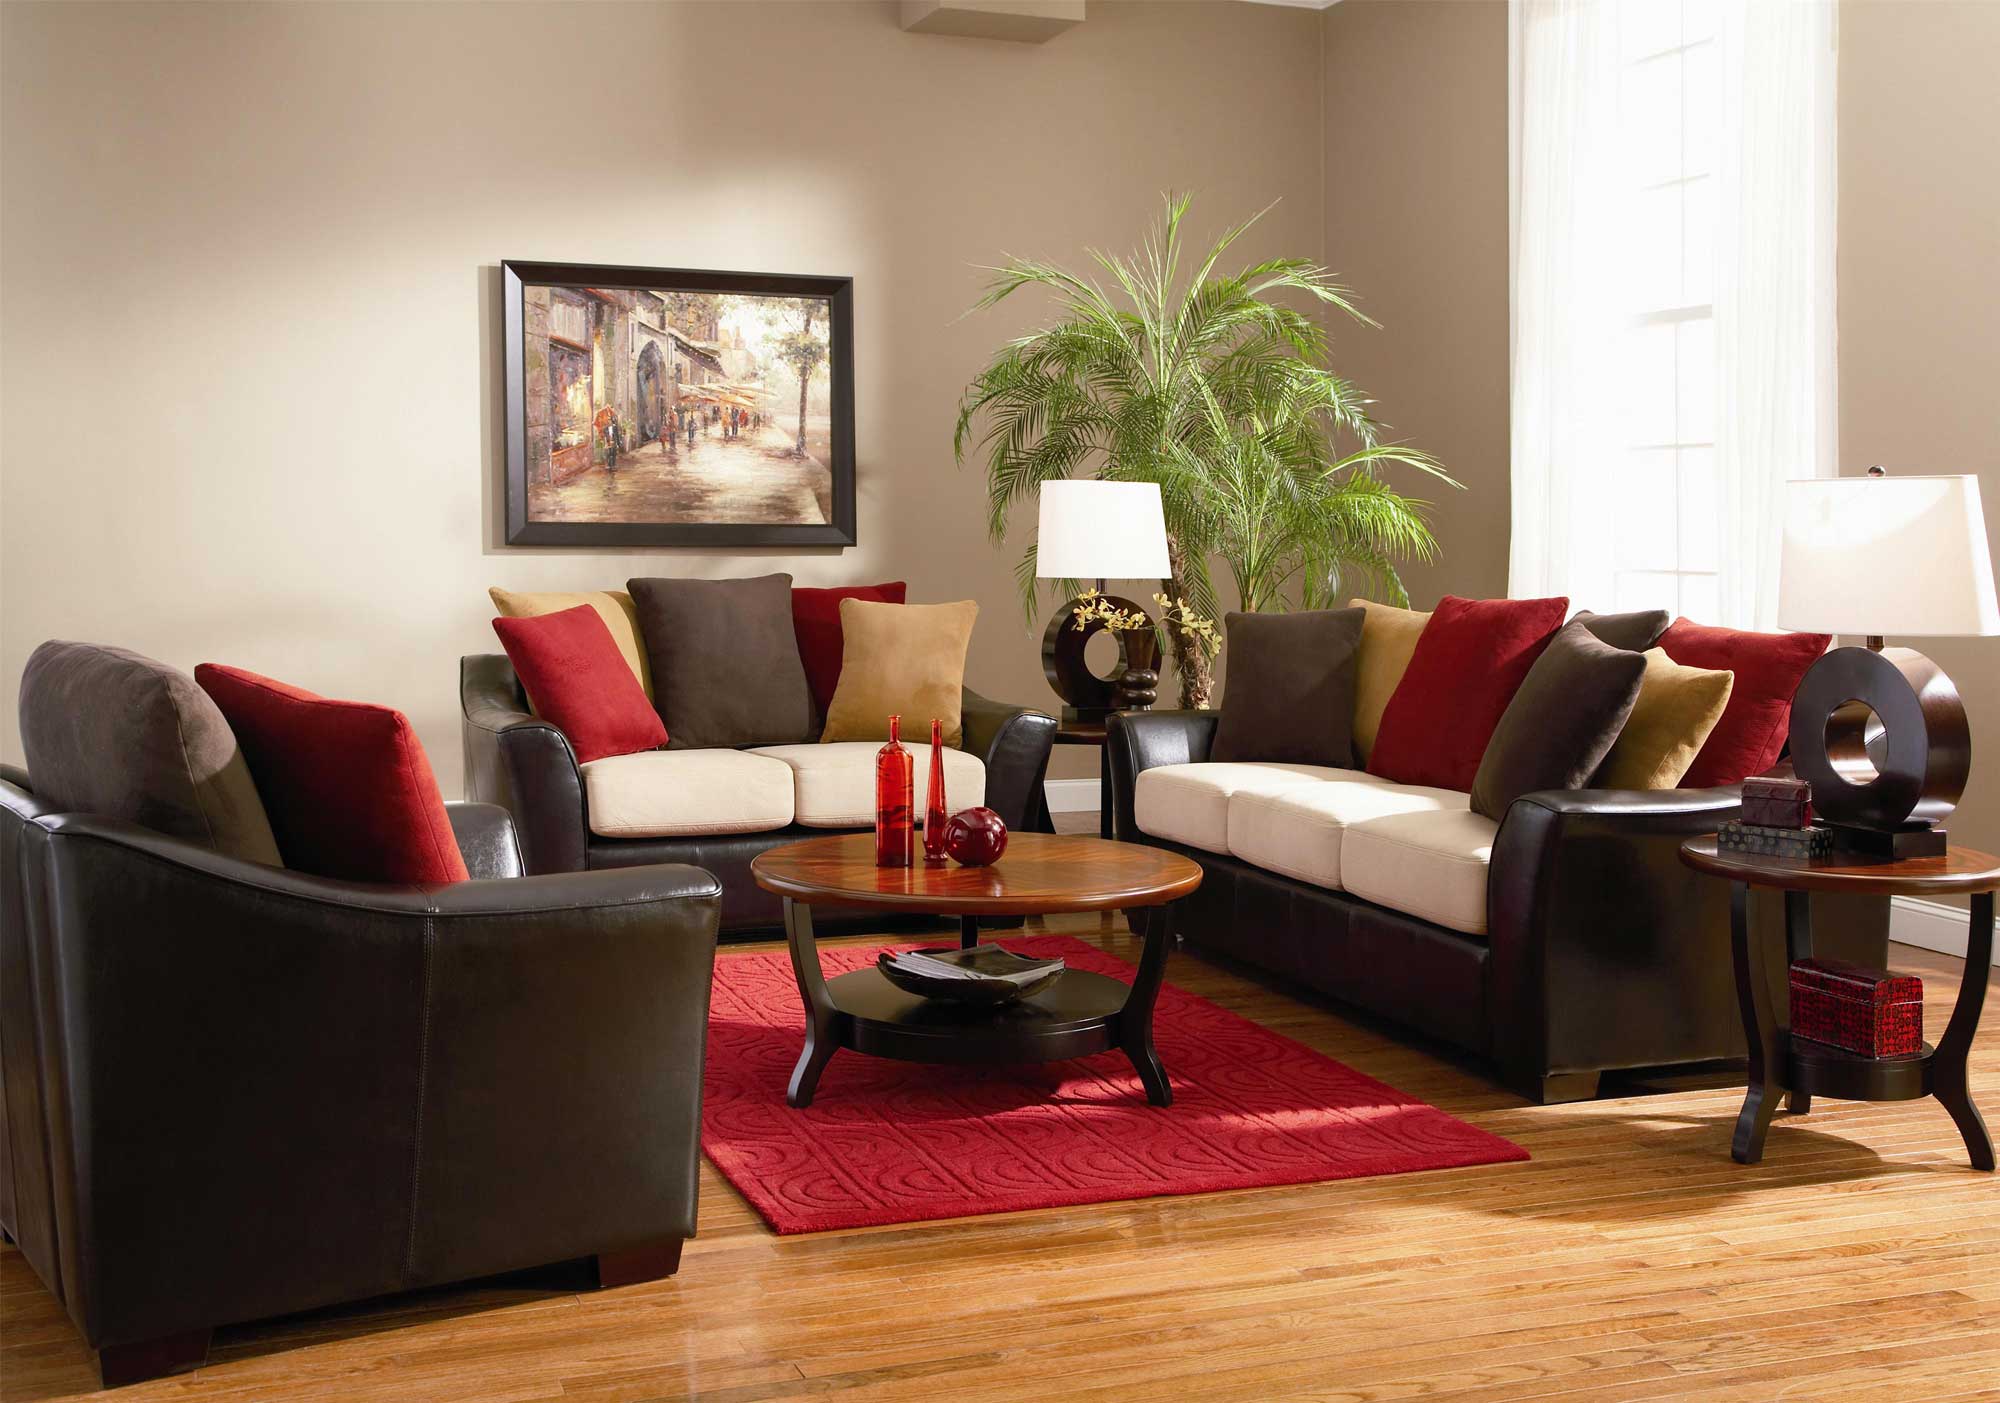 Living Room With Beautiful Living Room Furniture Sets With Sofa Also Loveseat And Chairs With Hodgepodge Cushions Furnished With Round Table On Red Rug And Completed With Table Lamps Furniture The Best Living Room Furniture Sets